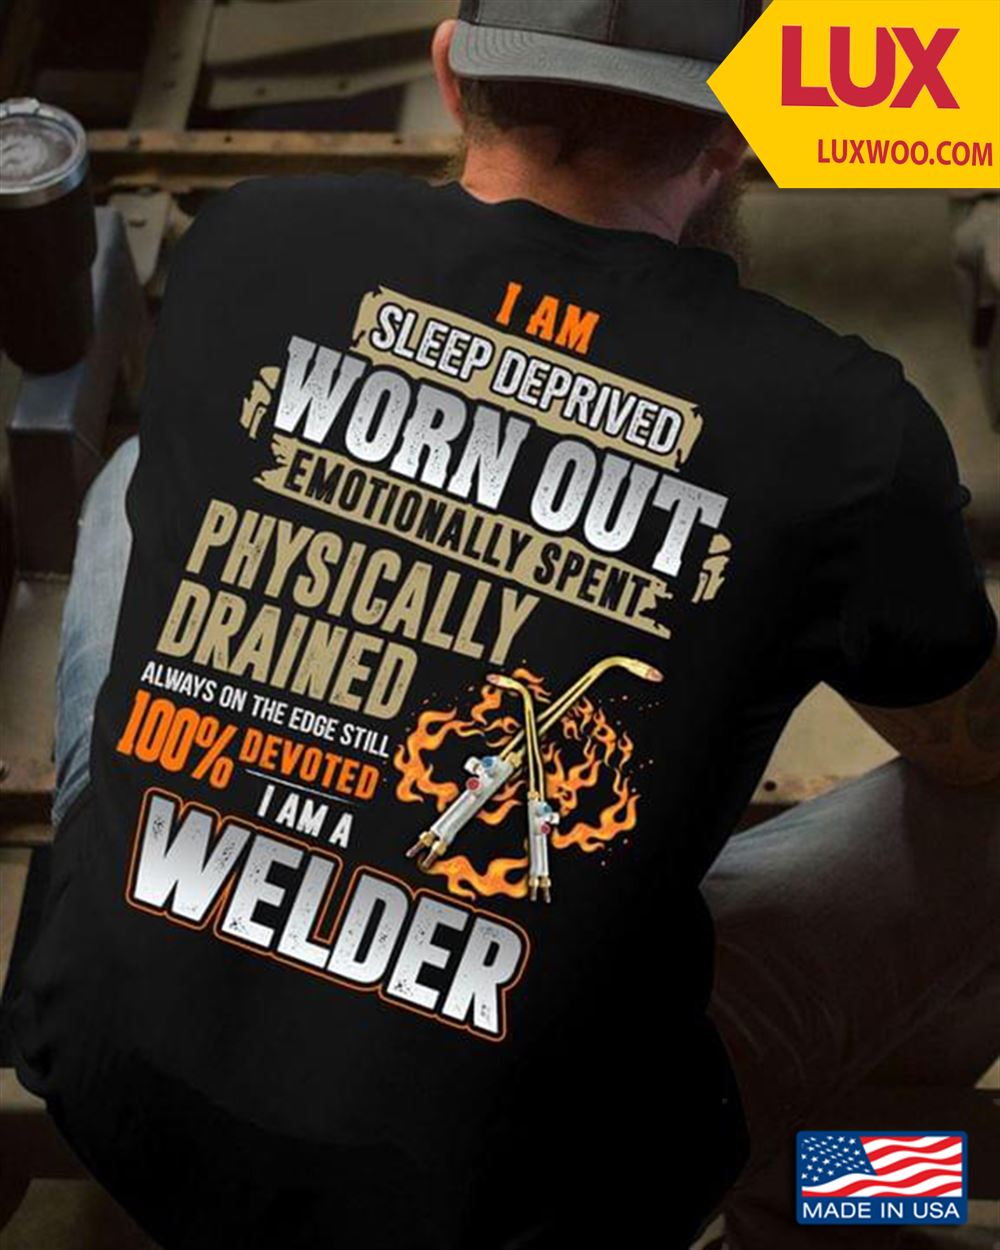 Welder I Am Sleep Deprived Worn Out Emotionally Spent Physically Drained Always On The Edge Shirt Size Up To 5xl